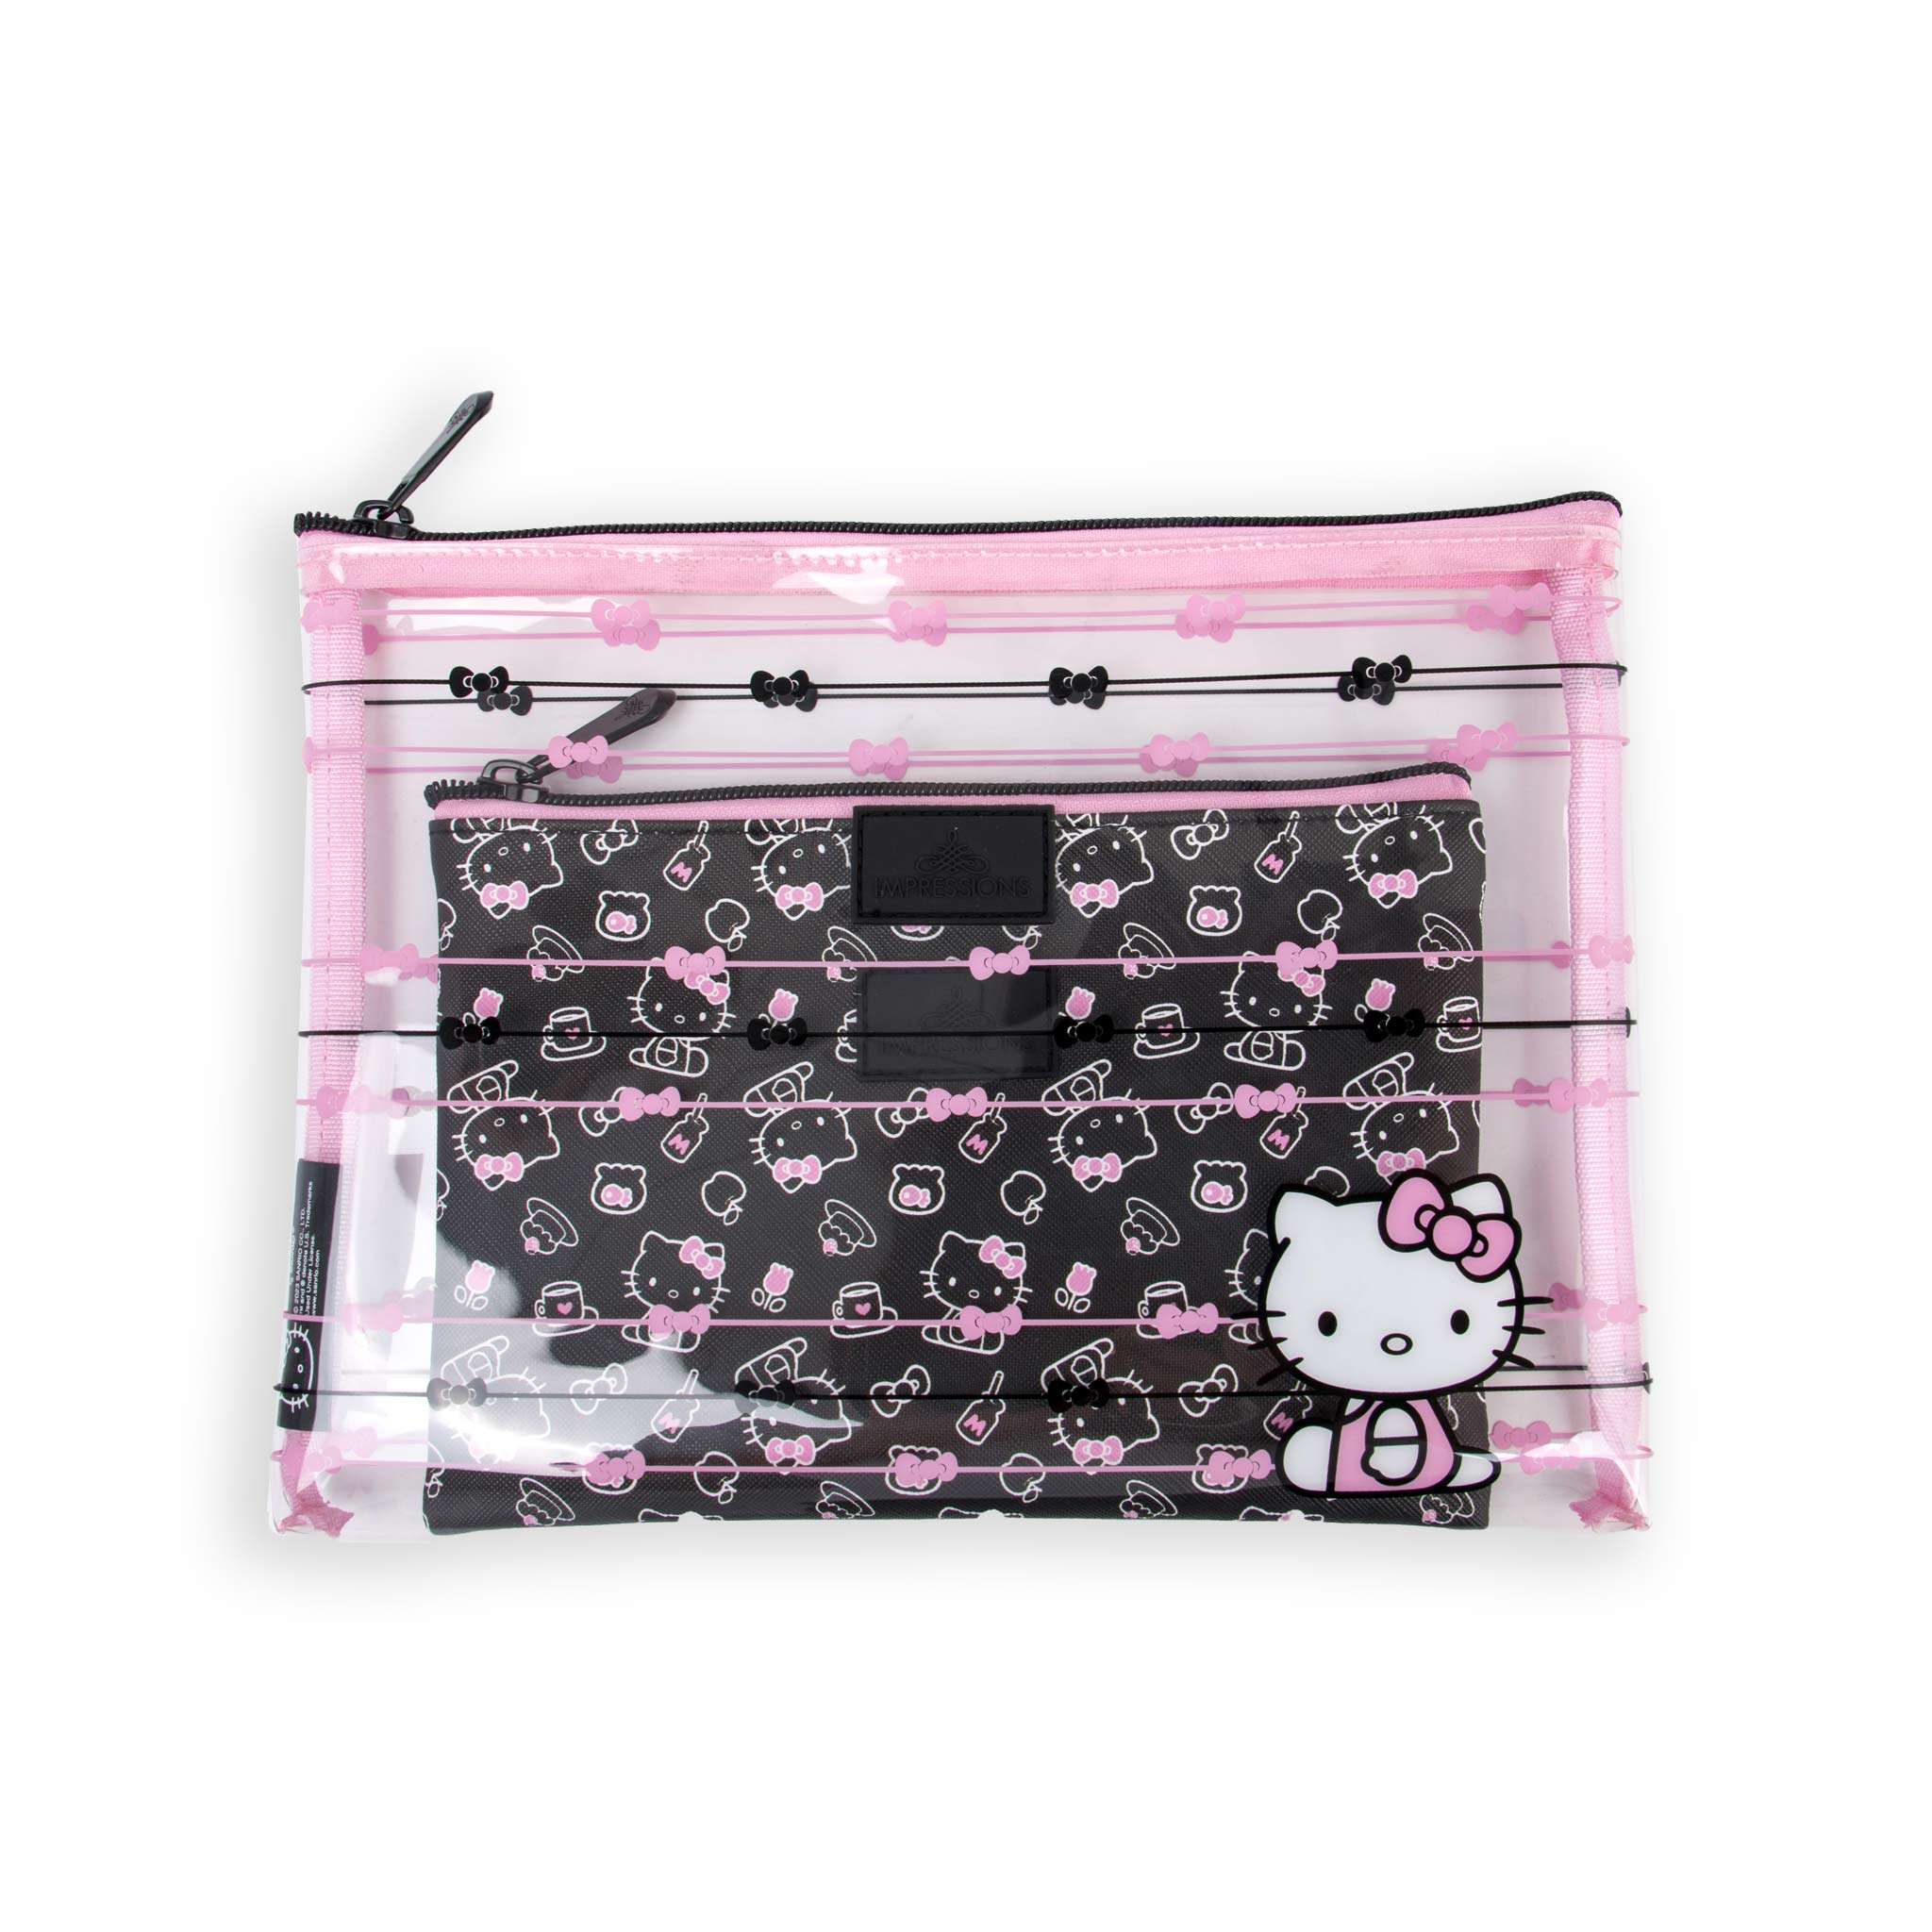 Impressions Vanity Hello Kitty Slim 2 Pcs Nested Cute Makeup Pouch Set, Water Resistant Zippered Travel Cosmetic Pouch Bags for Holding Makeup